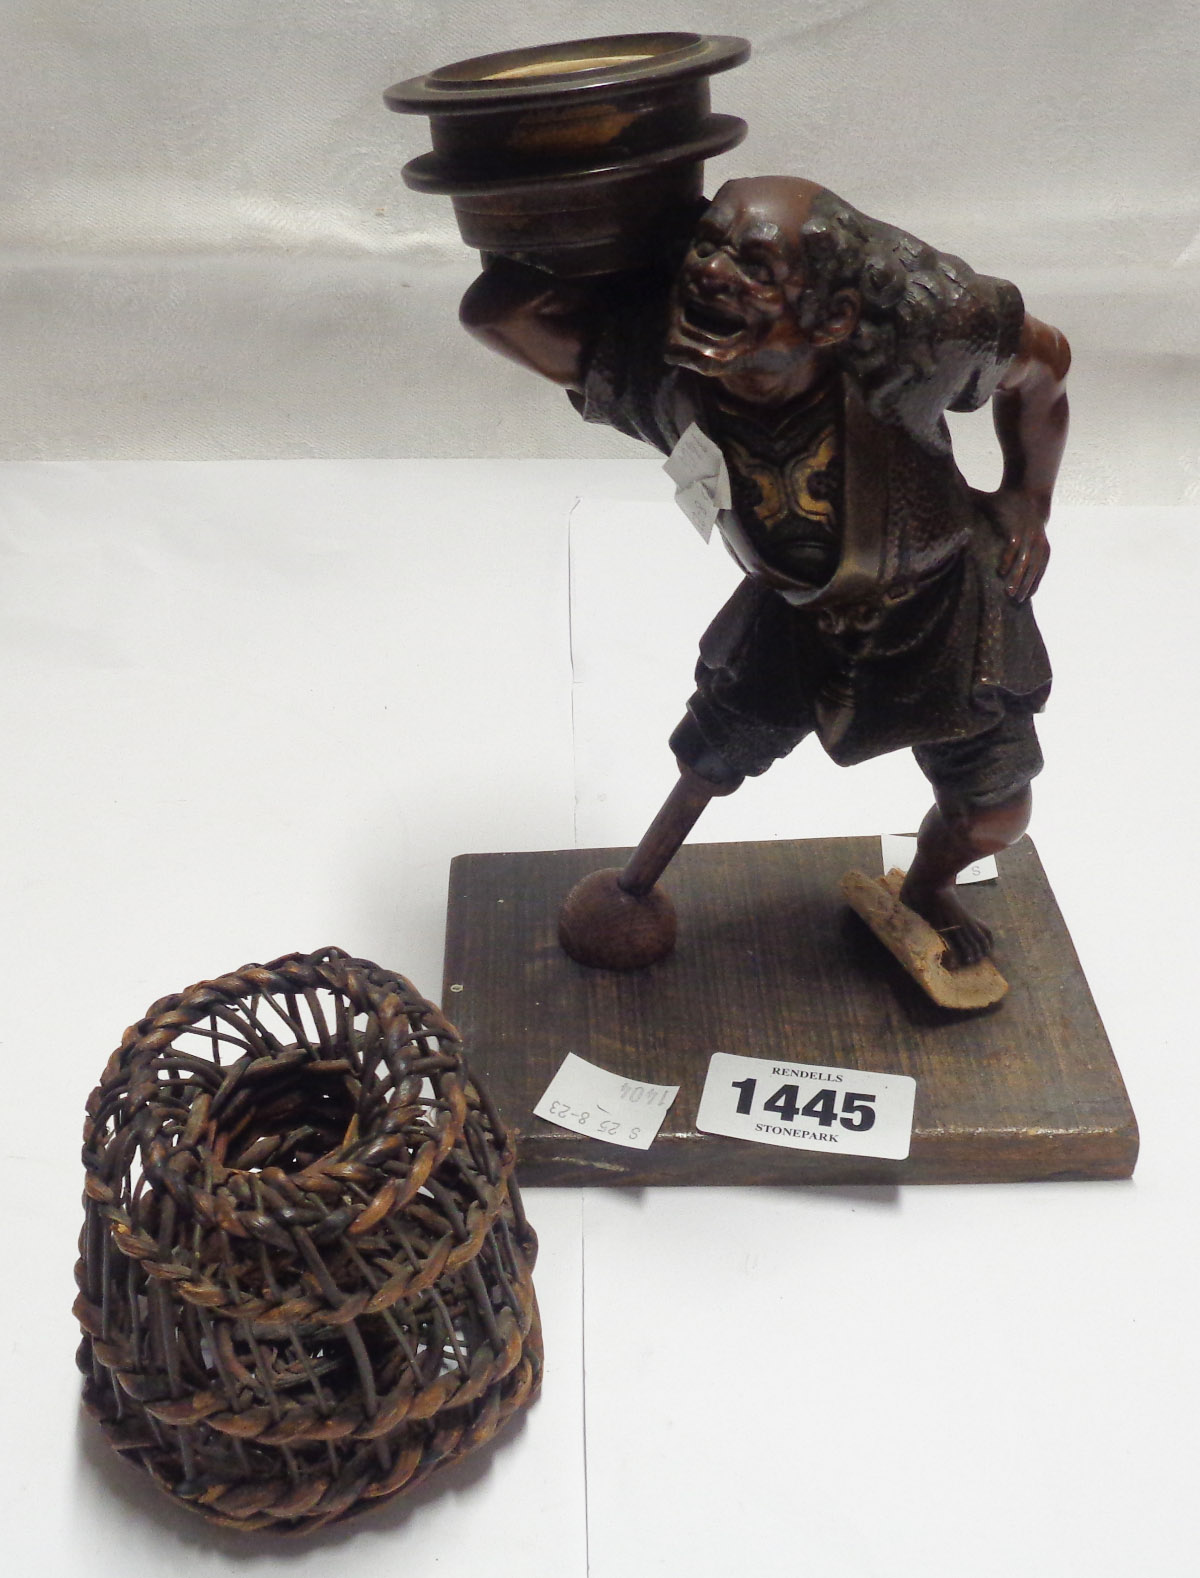 A Japanese Meiji period bronze figural candlestick depicting a sailor with later adapted replacement